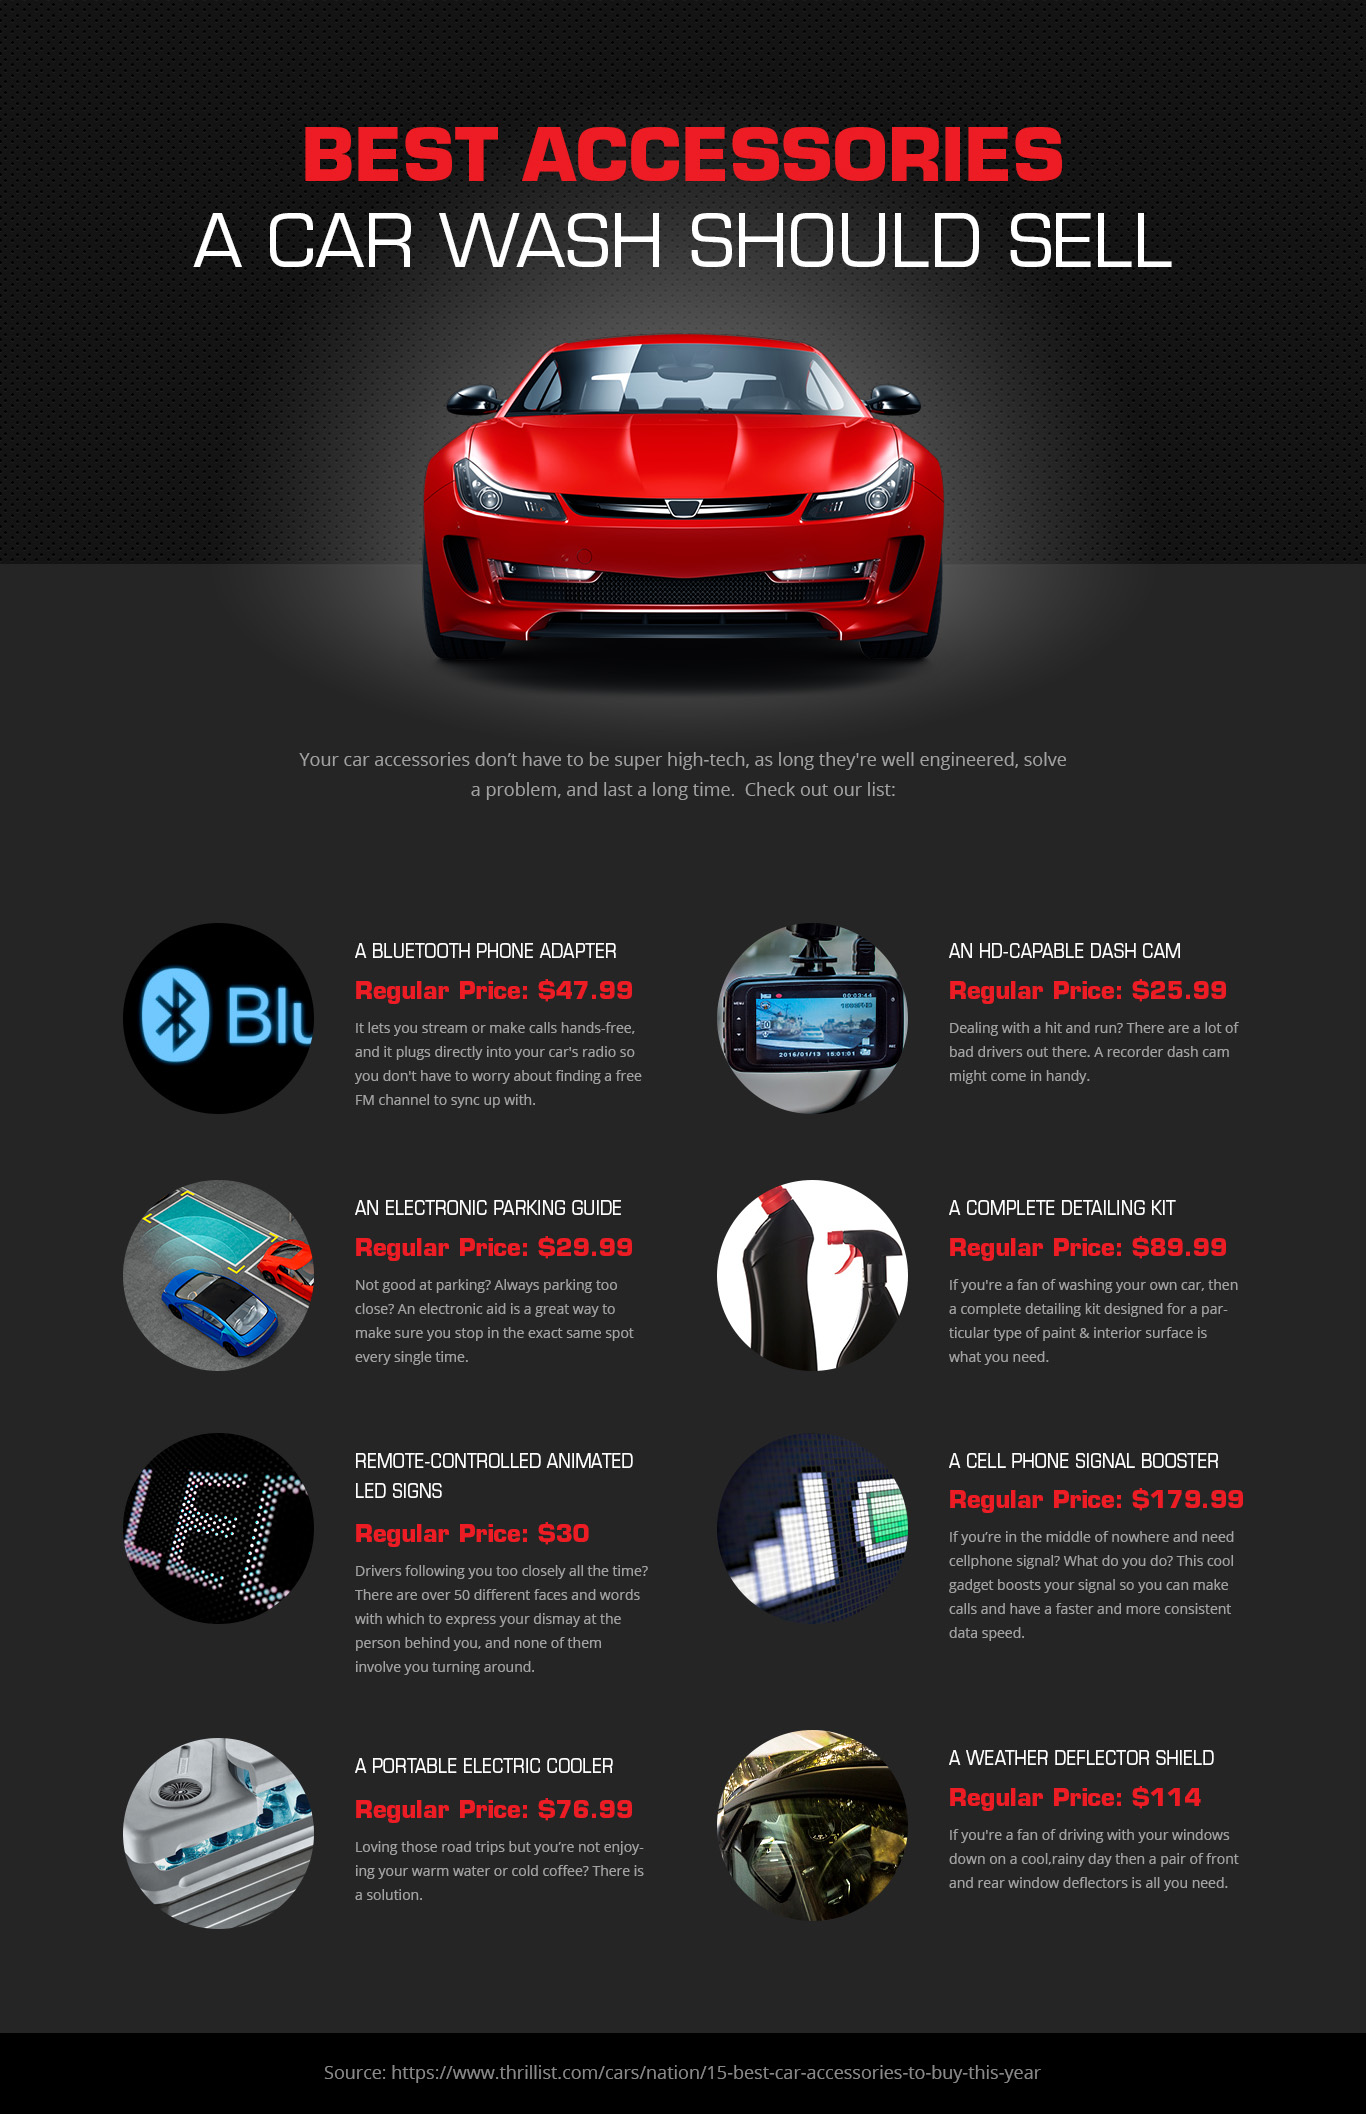 Infographic: Best car accessories a carwash should sell